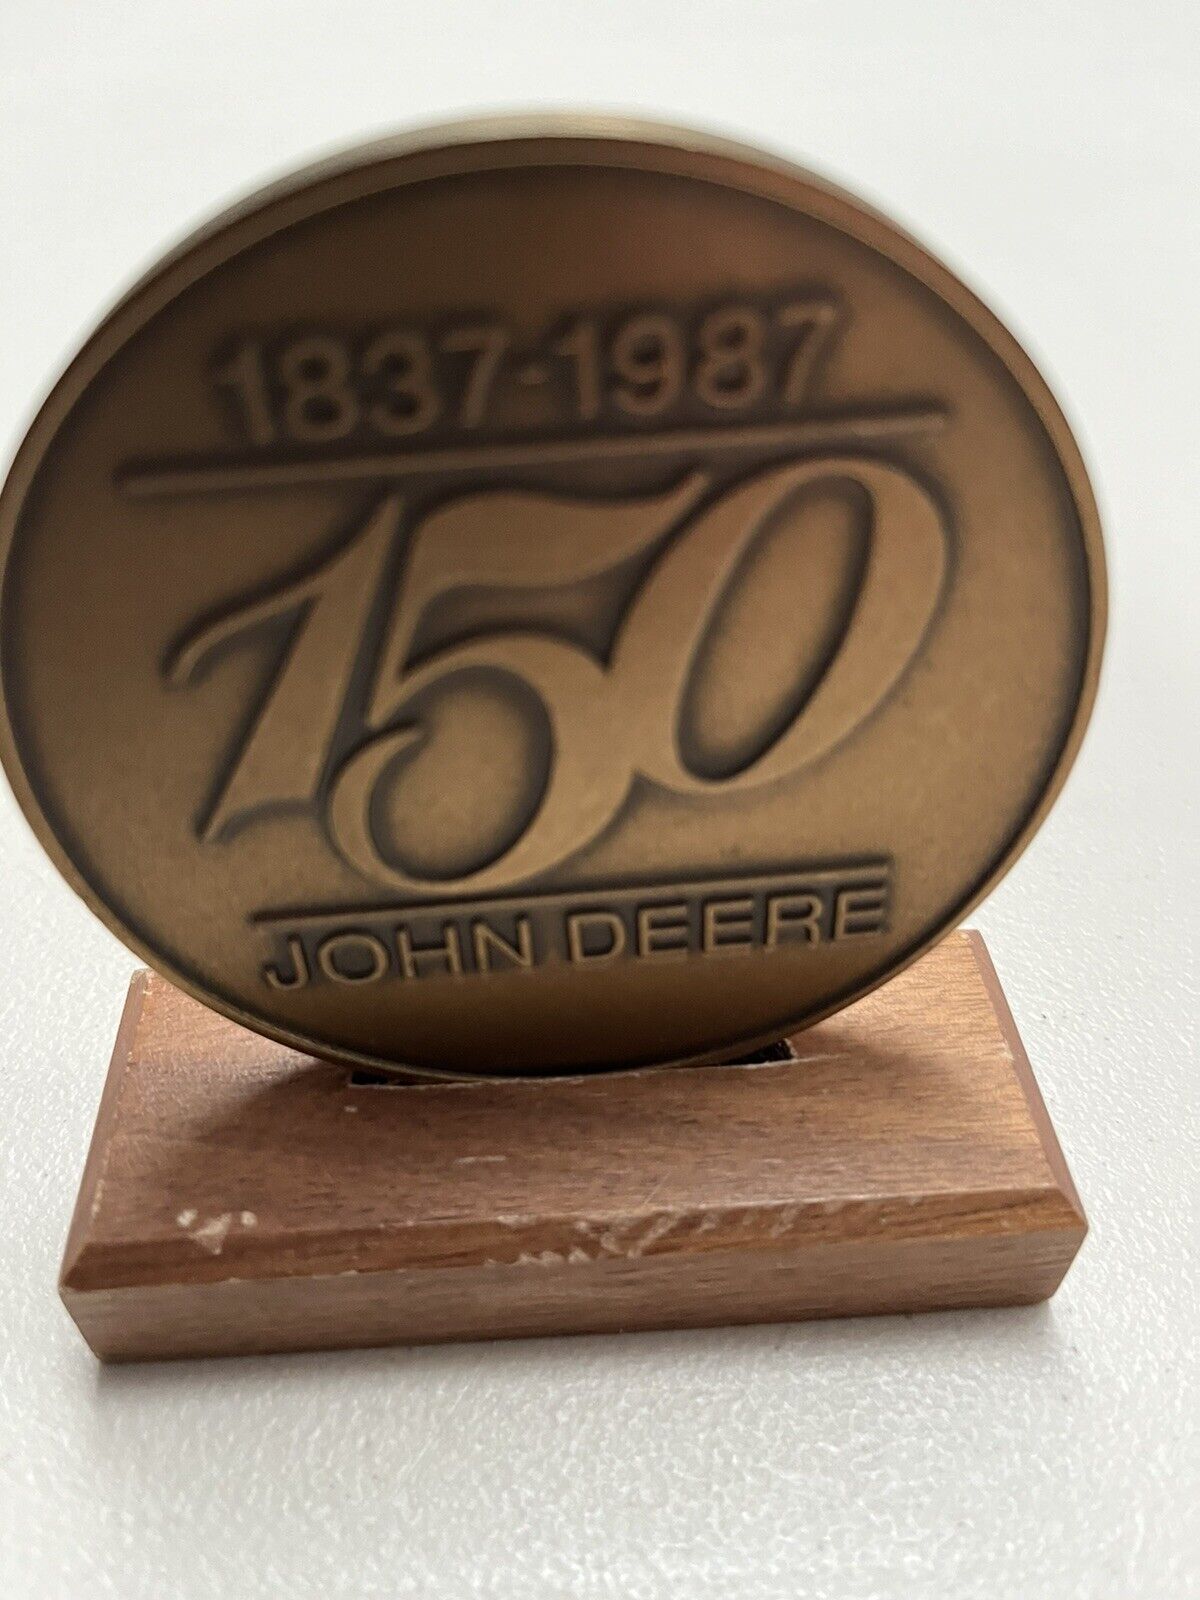 Preowned John Deere 150th Anniversary Medallion -1837 To 1987